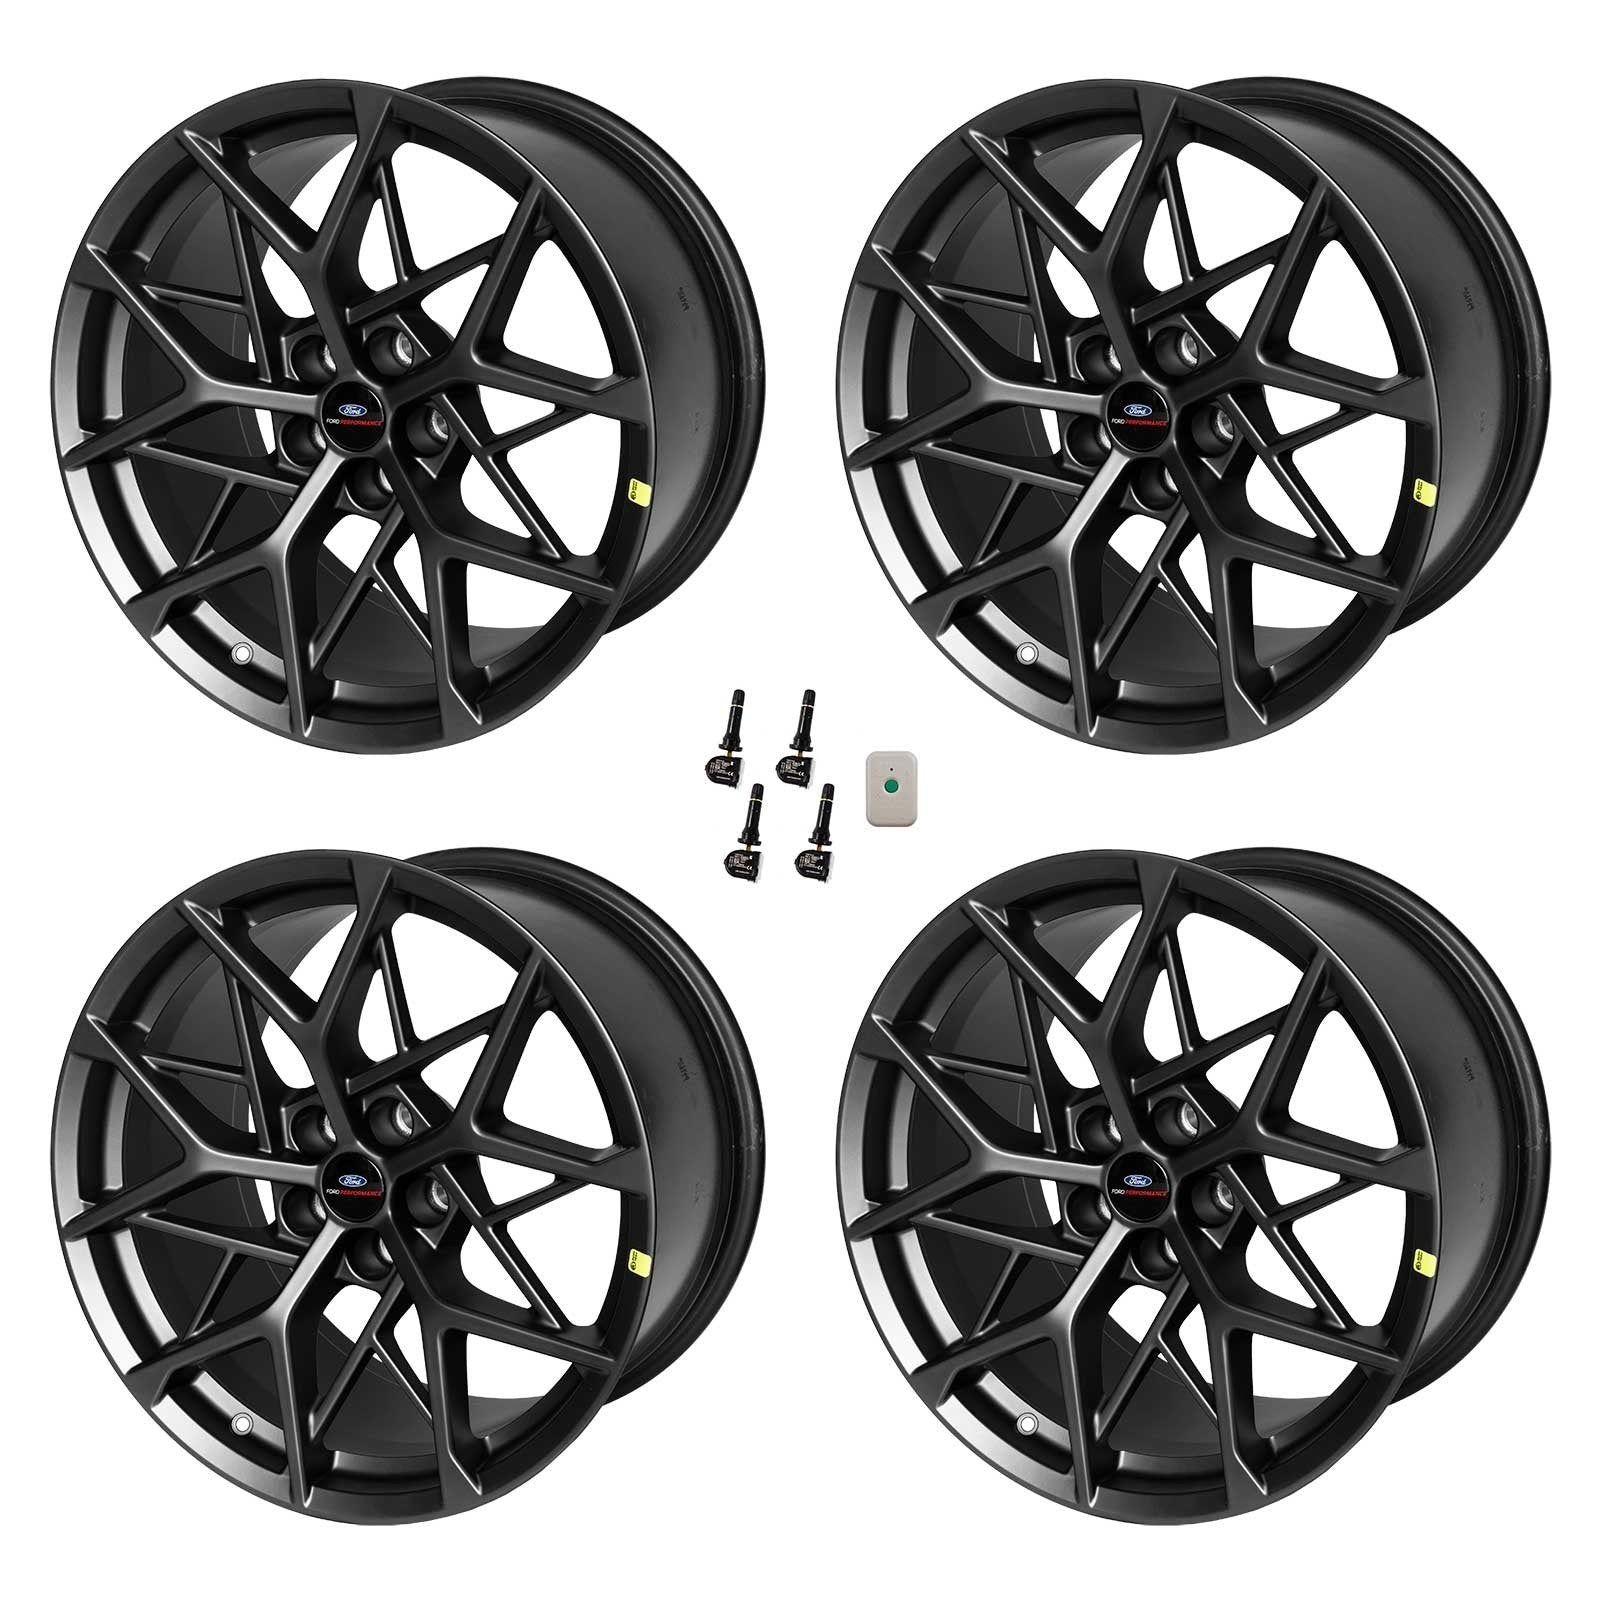 Ford Performance 19" Mach One Handling Pack Roues "Birds Nest"